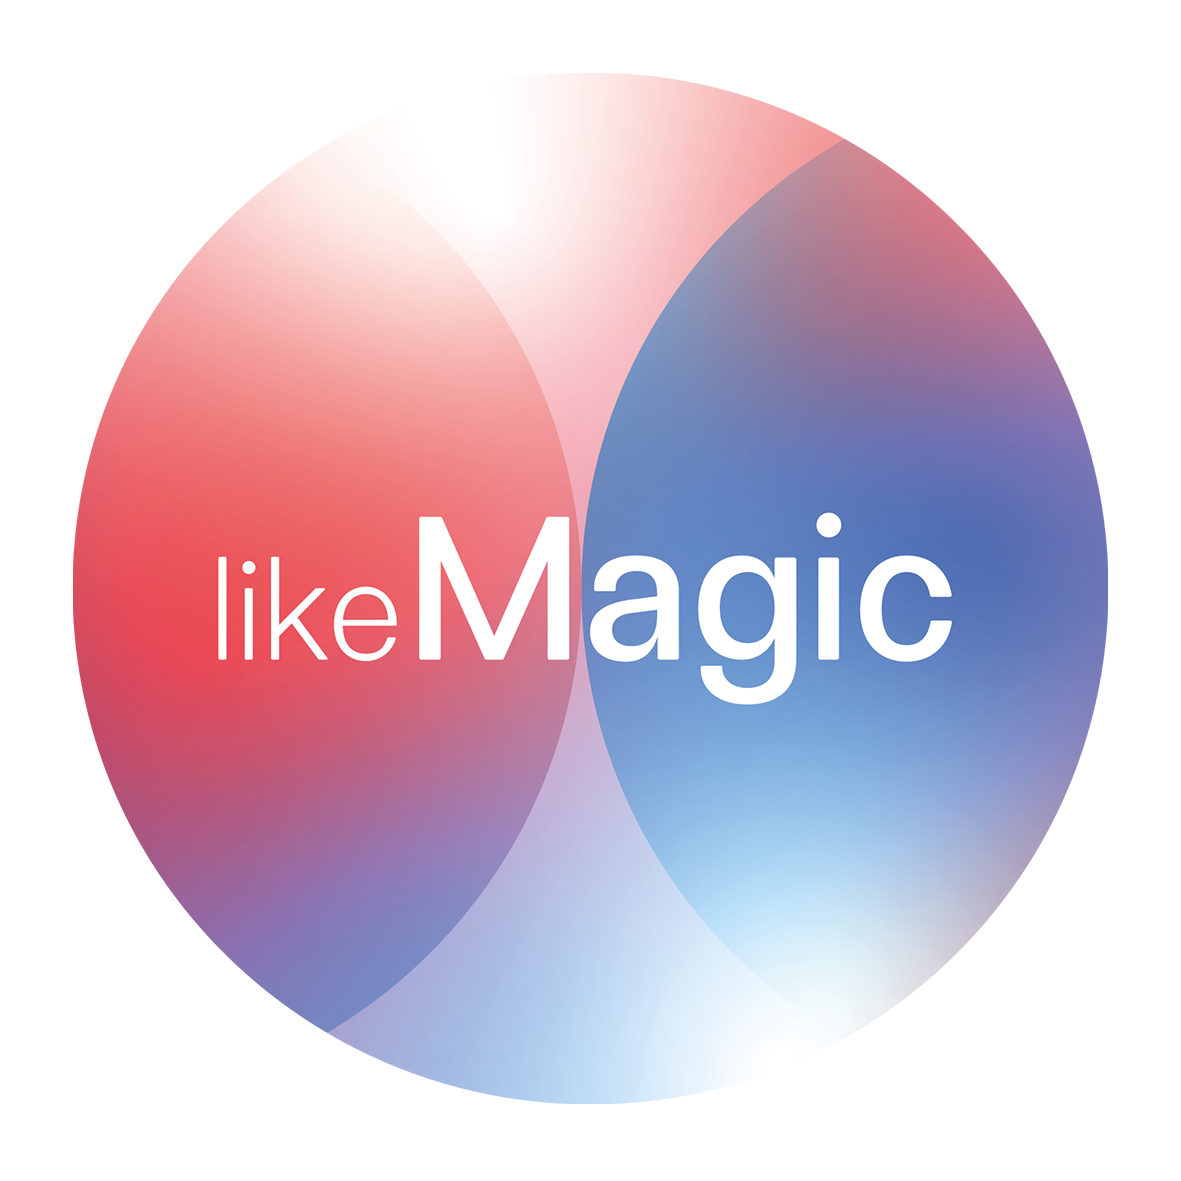 likeMagic logo \ a venture by SV Group - HoCoSo clients